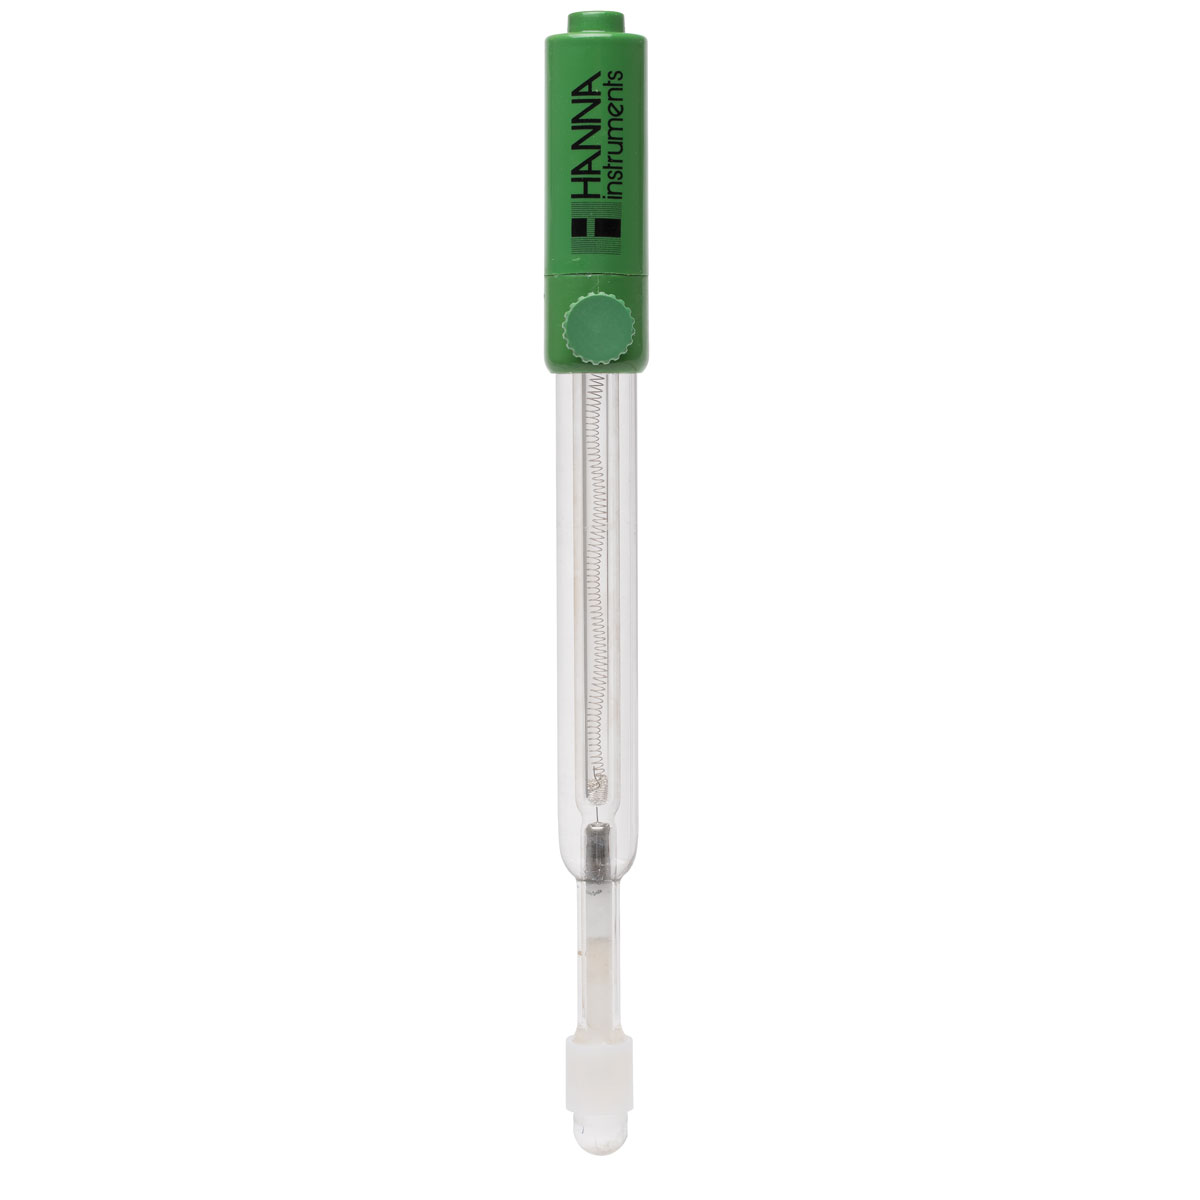 HI5413 Reference Electrode for ISE and Samples with Suspended Solids